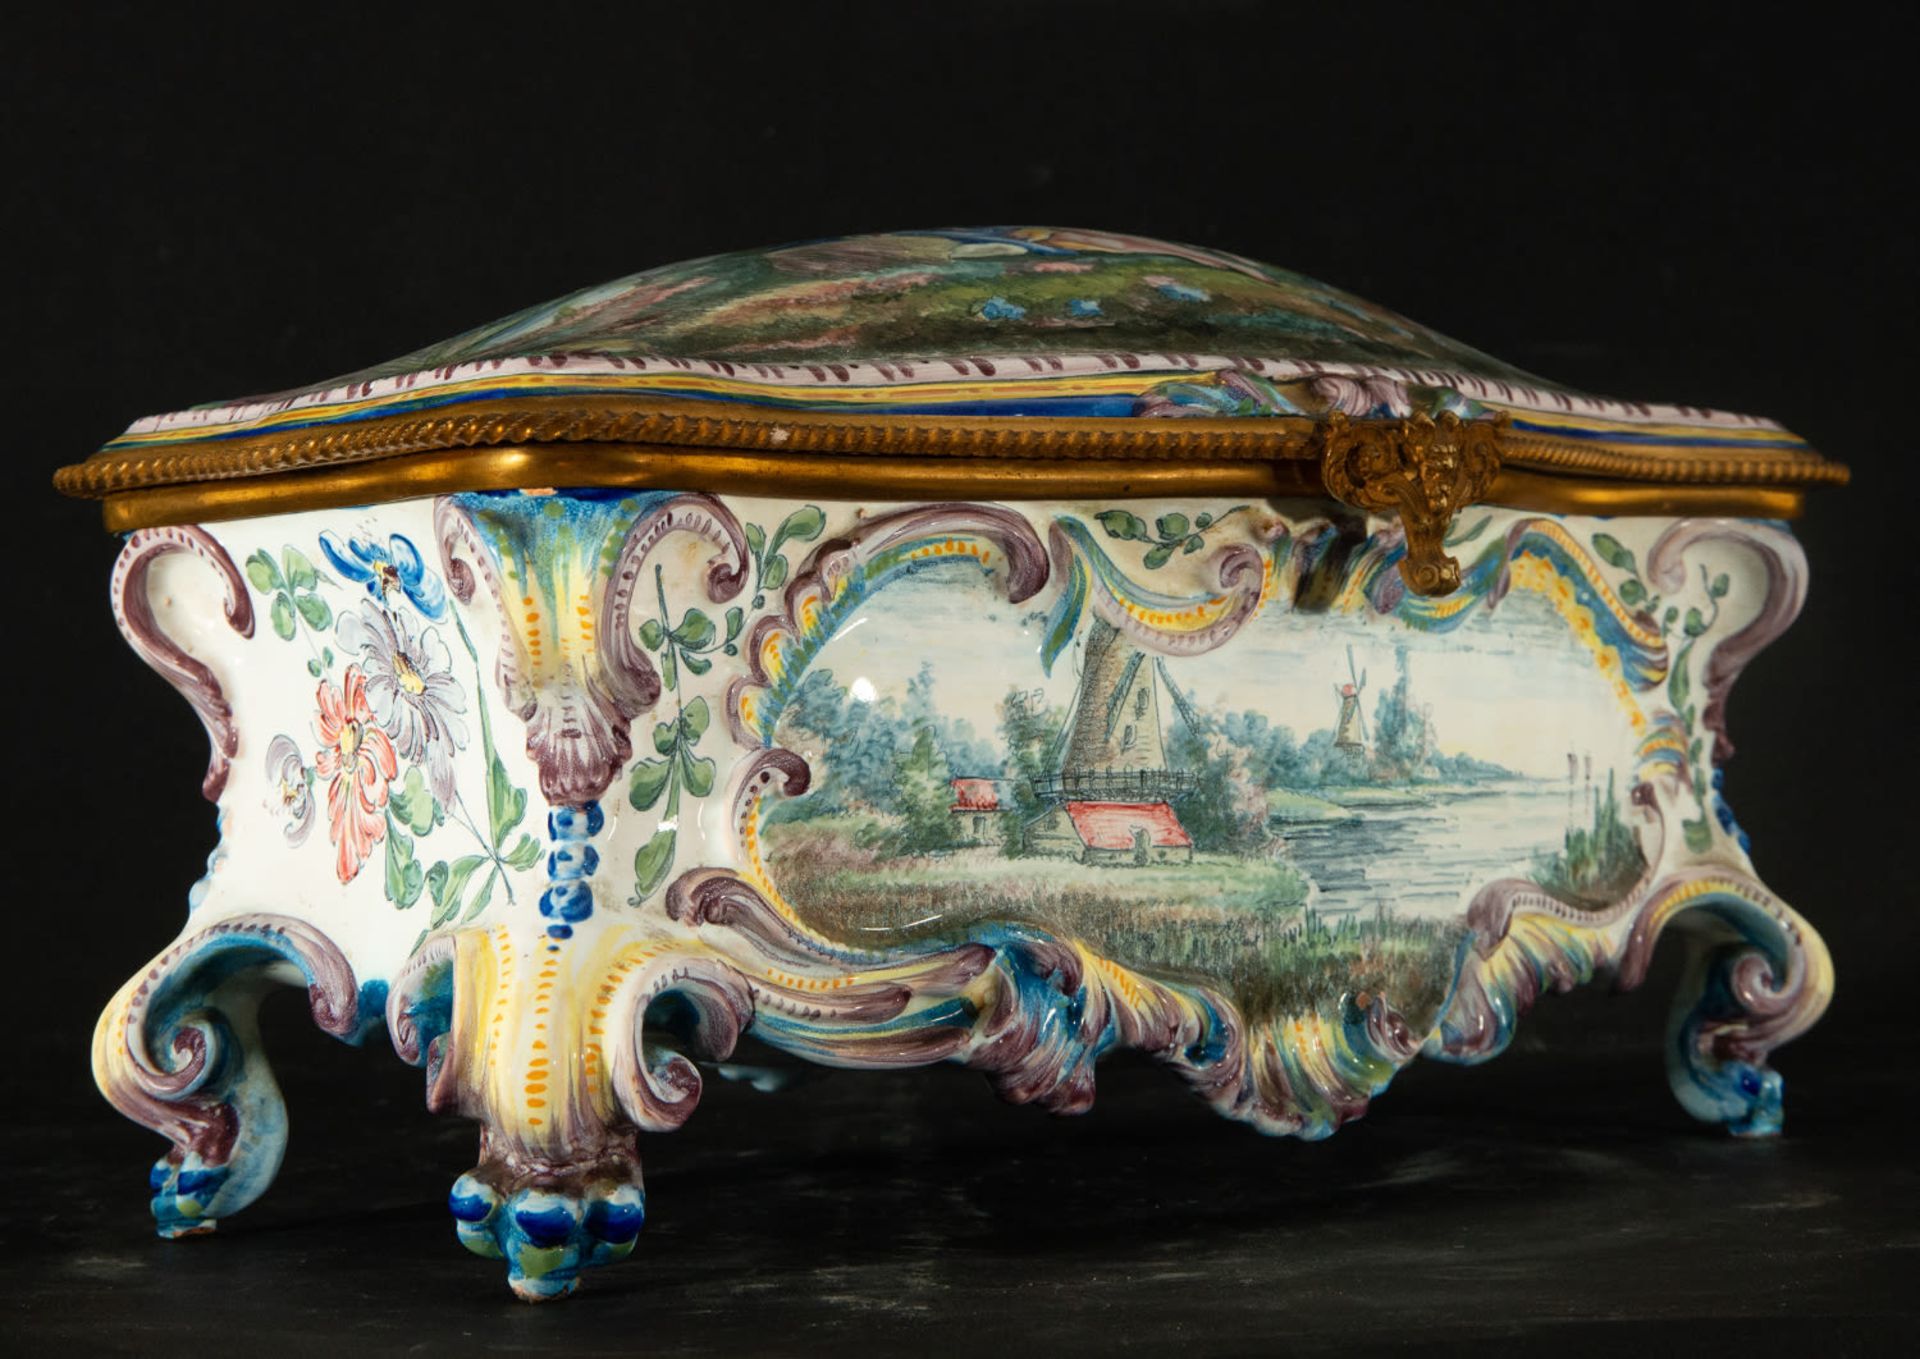 Magnificent Marseille porcelain jewelry box with gallant scene, 19th century - Image 4 of 7